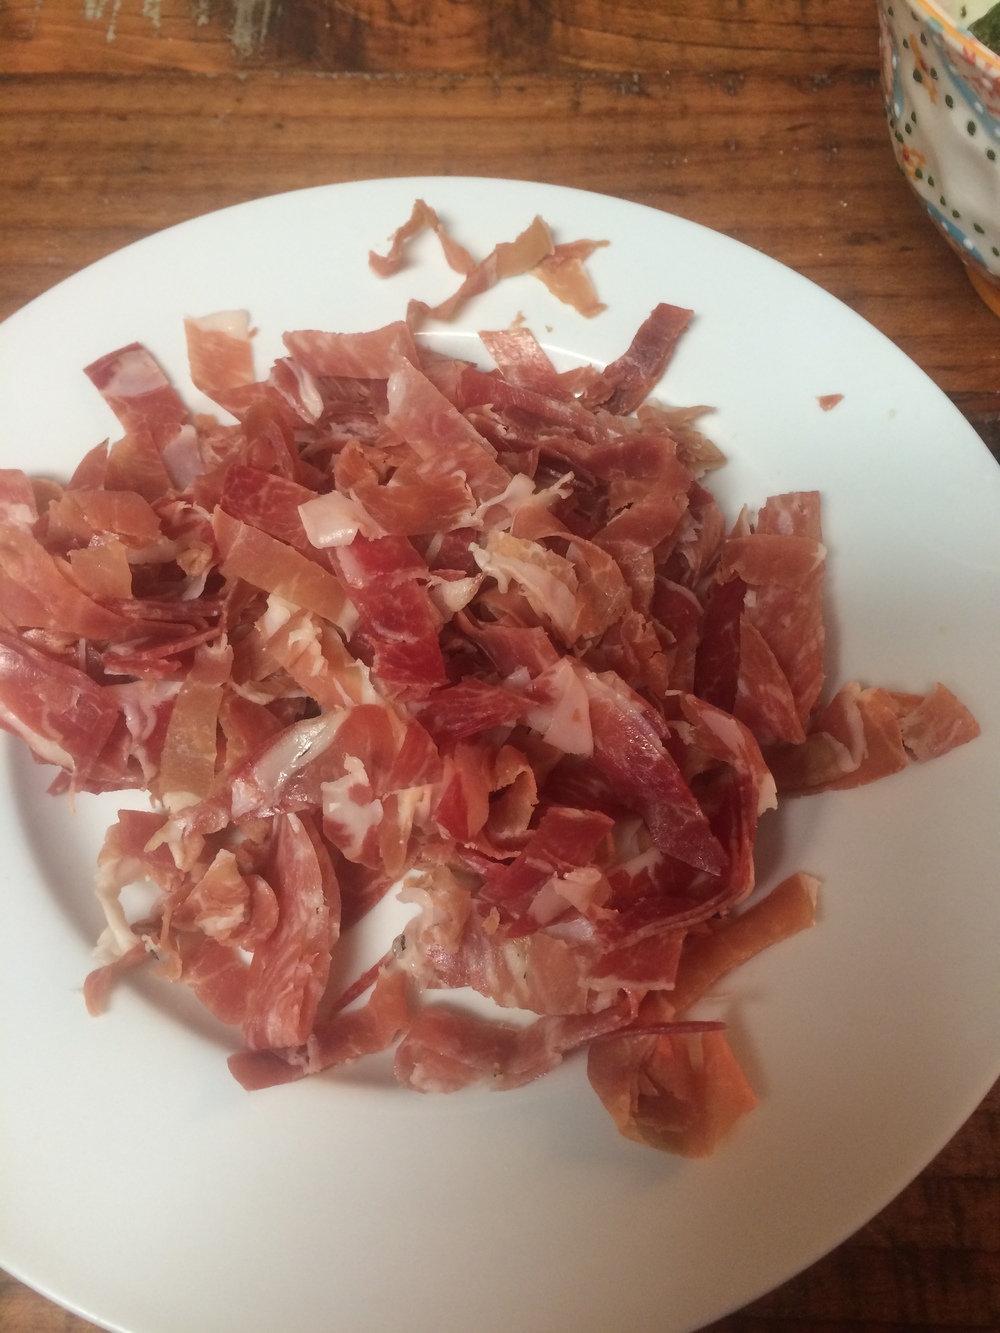 chopped salami and proscuitto